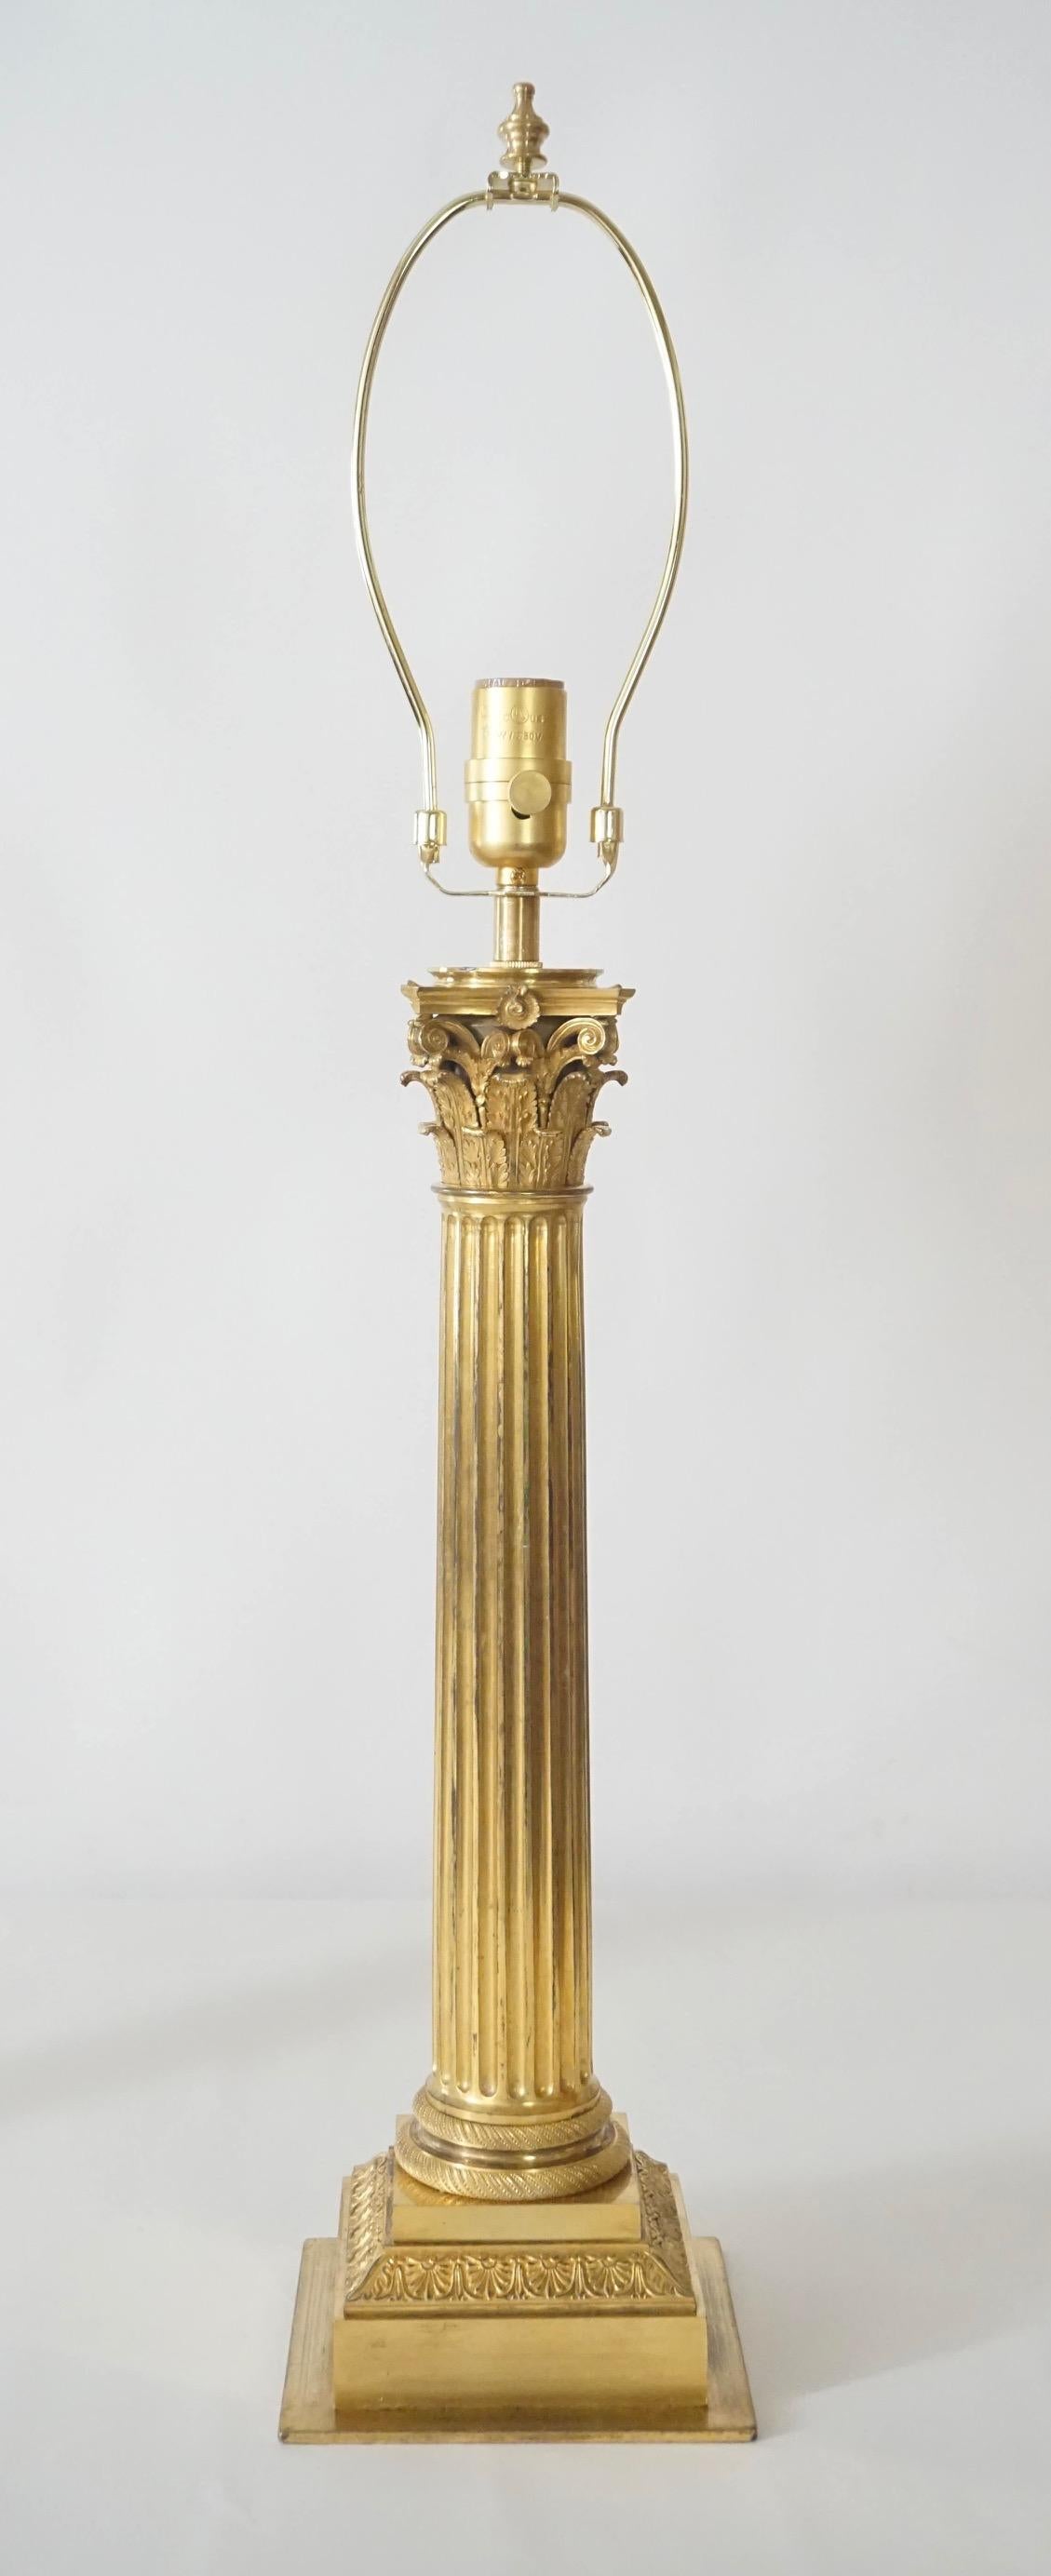 Ormolu Corinthian Column Sinumbra Base Table Lamps, France, circa 1825 In Good Condition For Sale In Kinderhook, NY